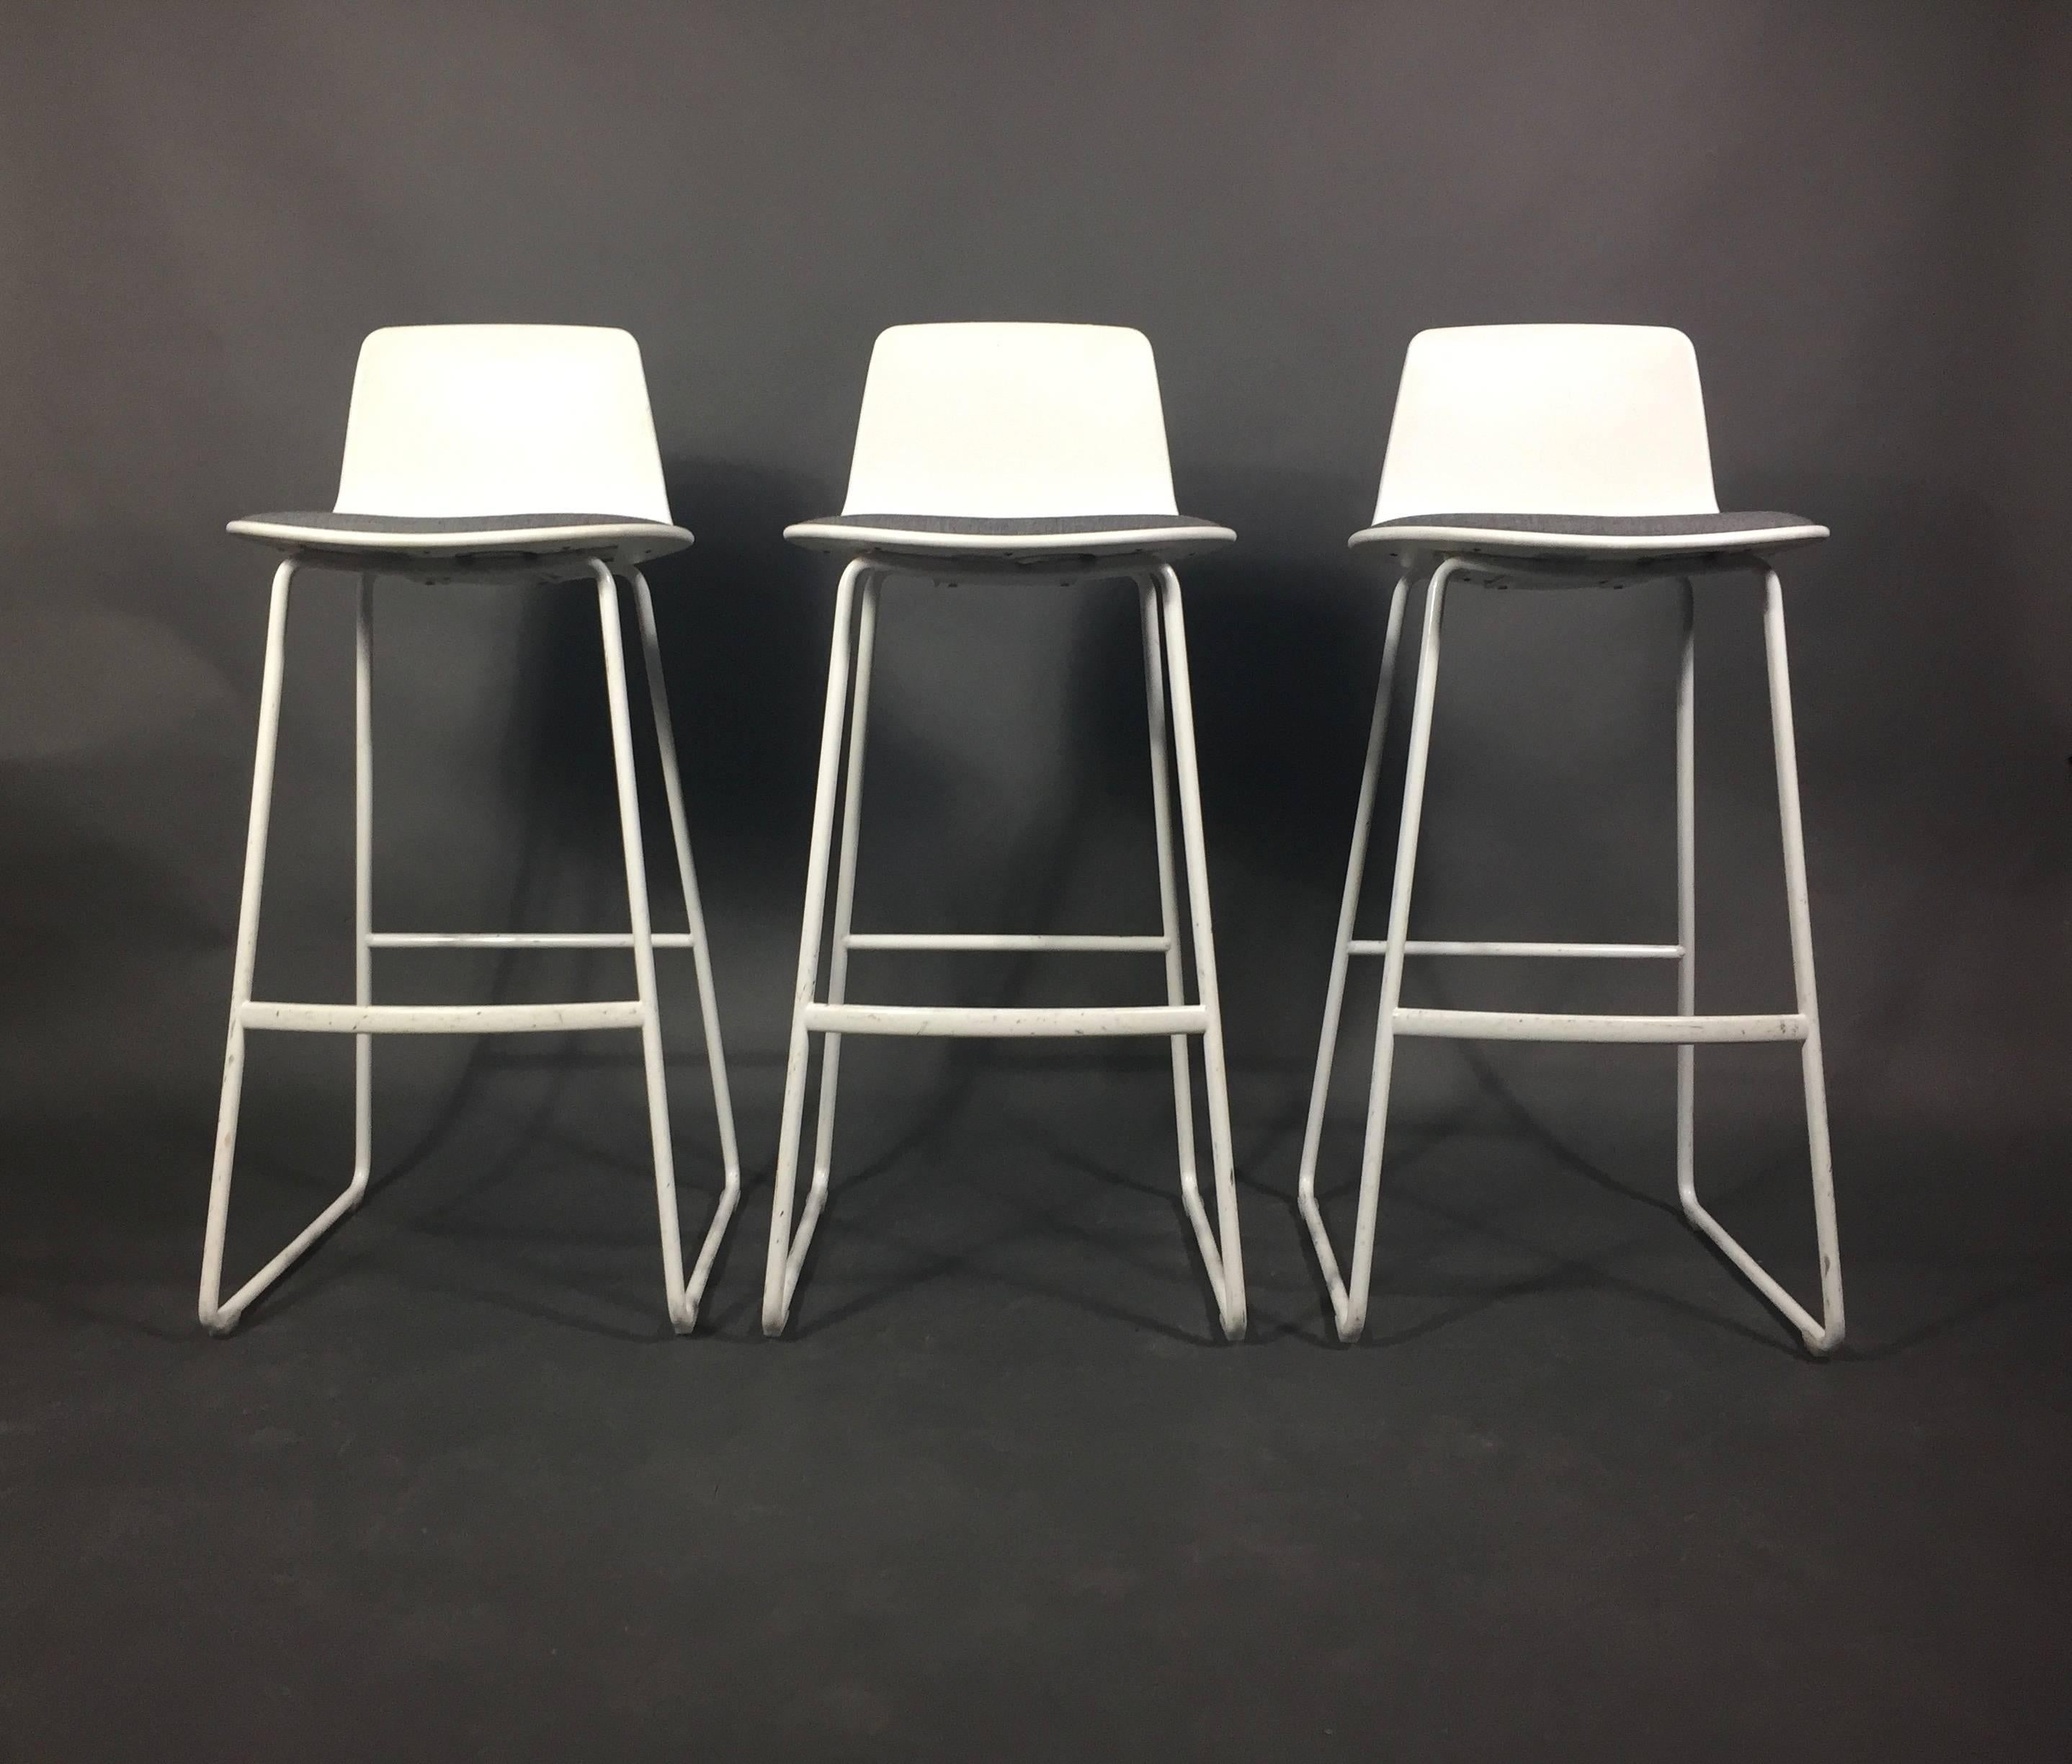 Enlightened contemporary design from the Lievore Altherr Molina studio in Barcelona. Sculpted plastic back on white lacquered frames with recently updated Danish gray upholstery fabric. 2011 production. Set of three. Made in Spain. Wear to frames.